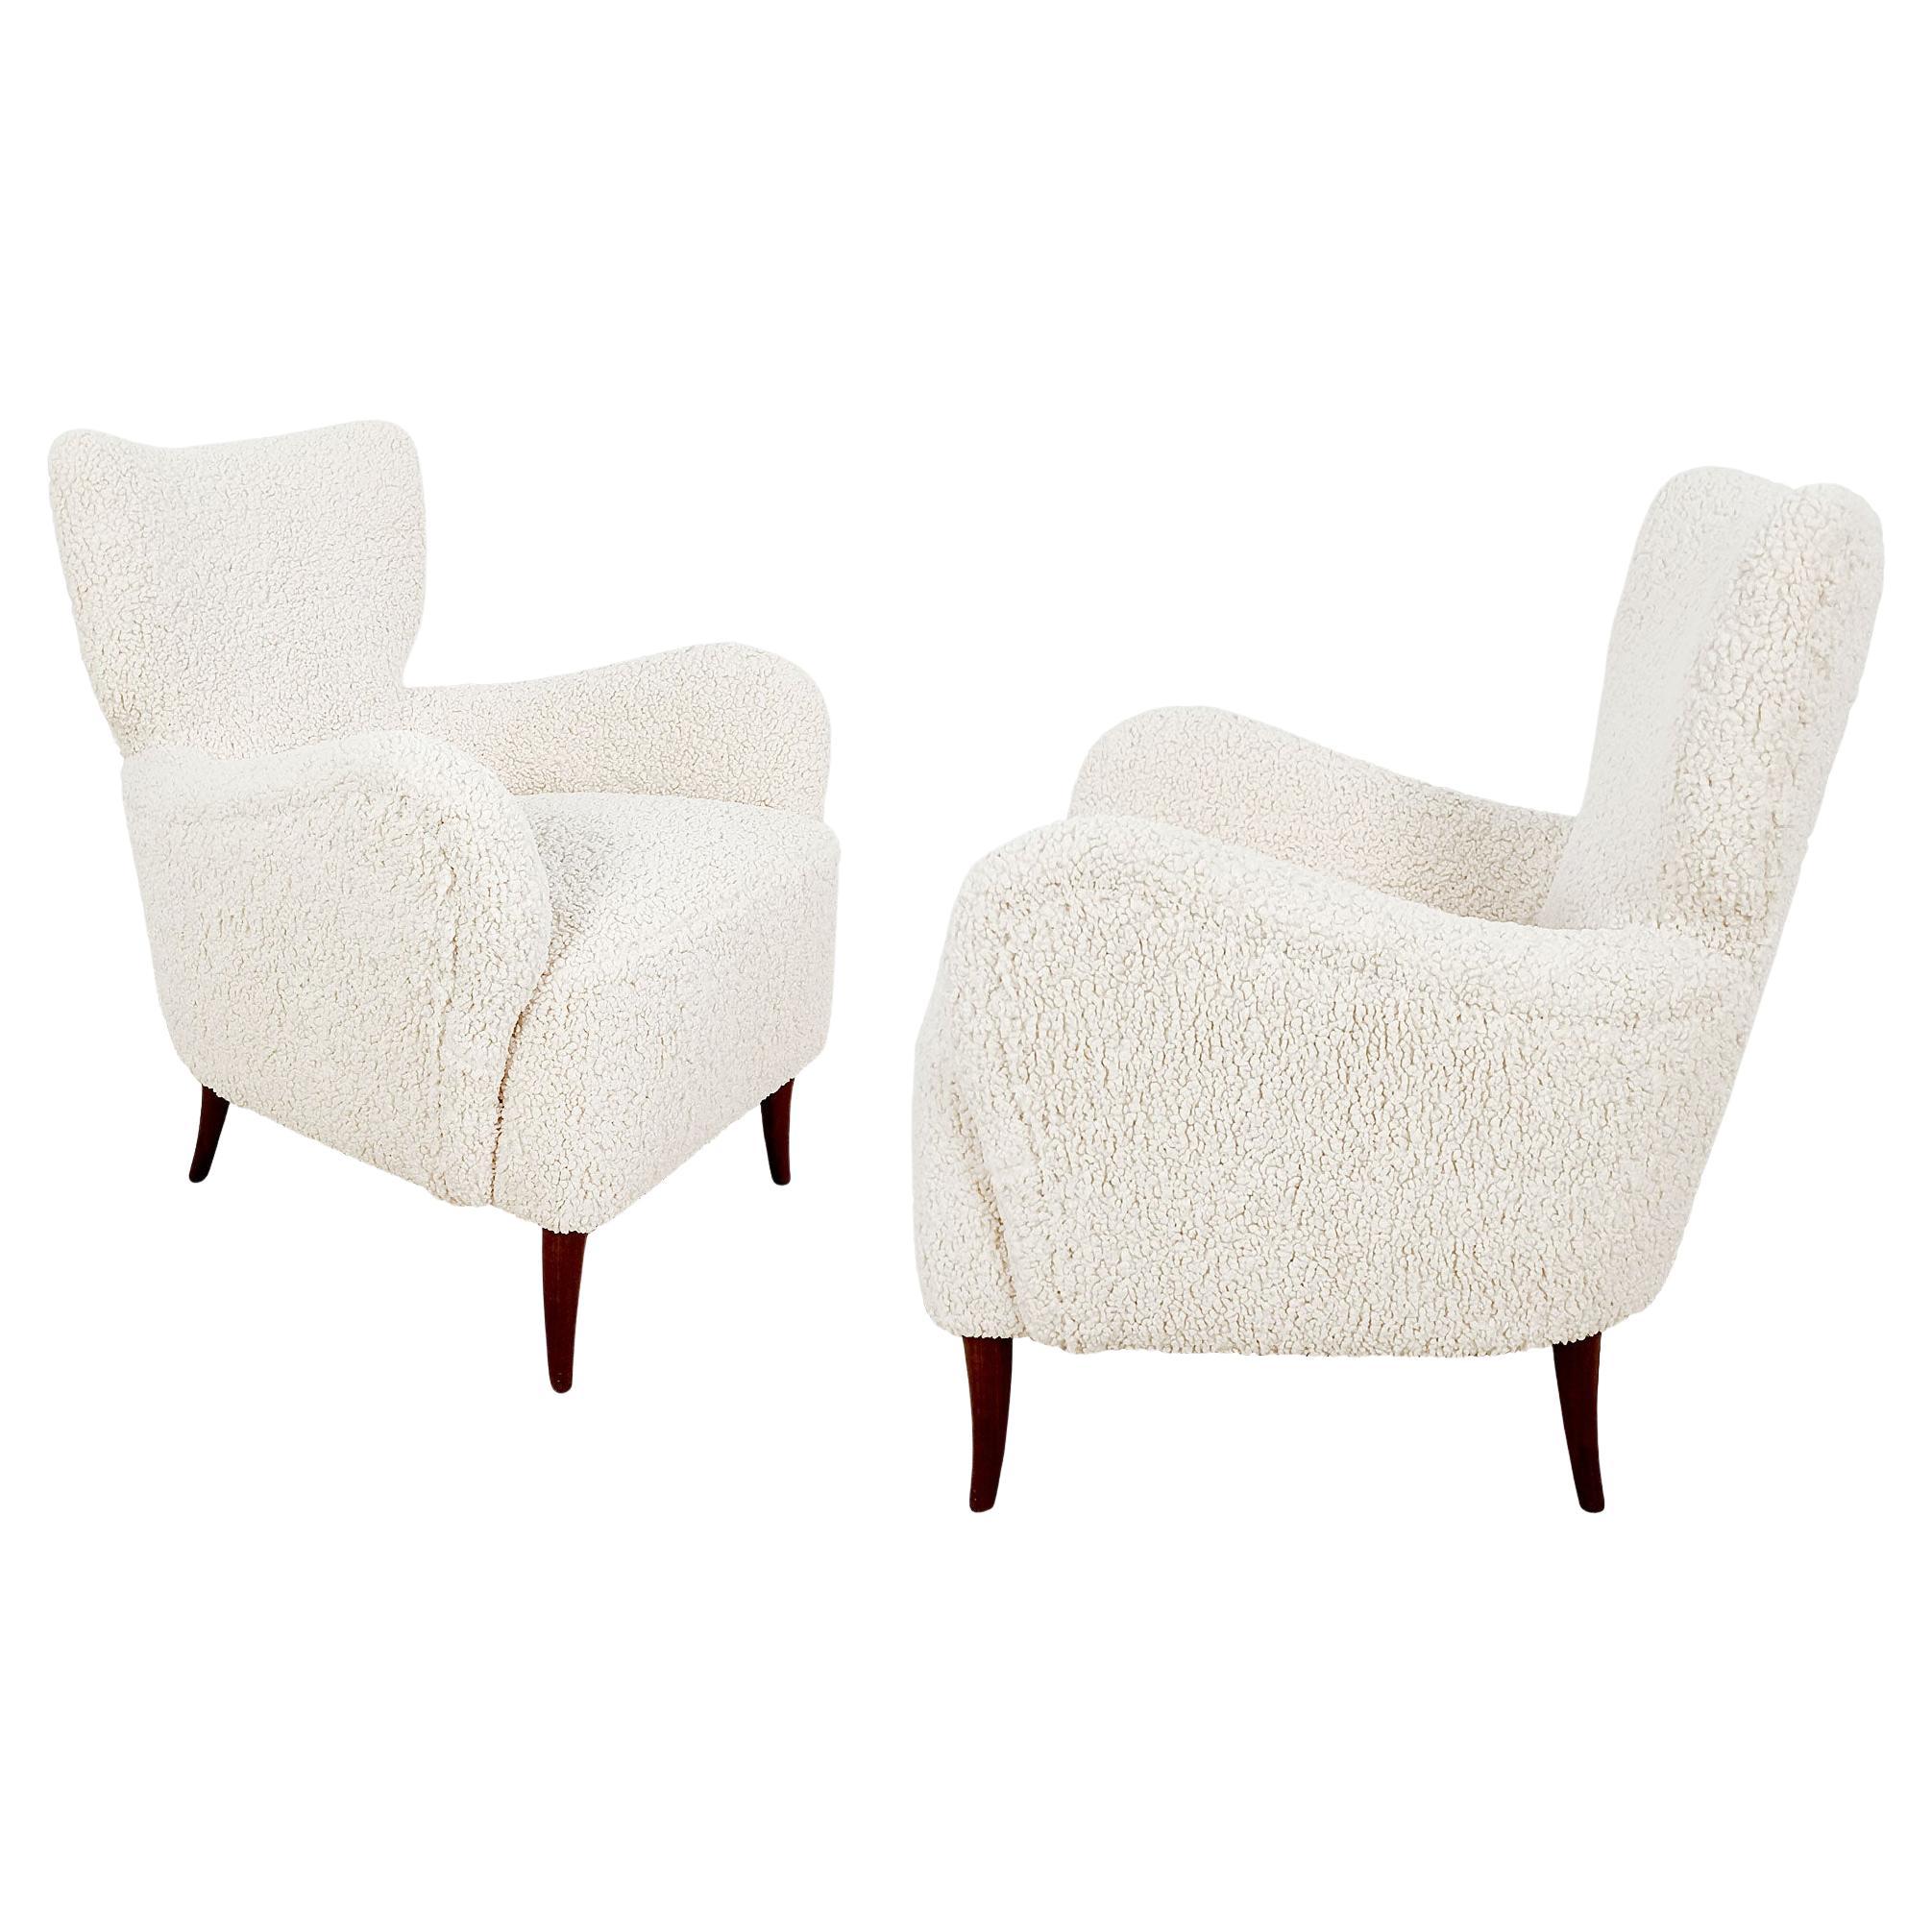 Pair of small low armchairs – Italy 1940